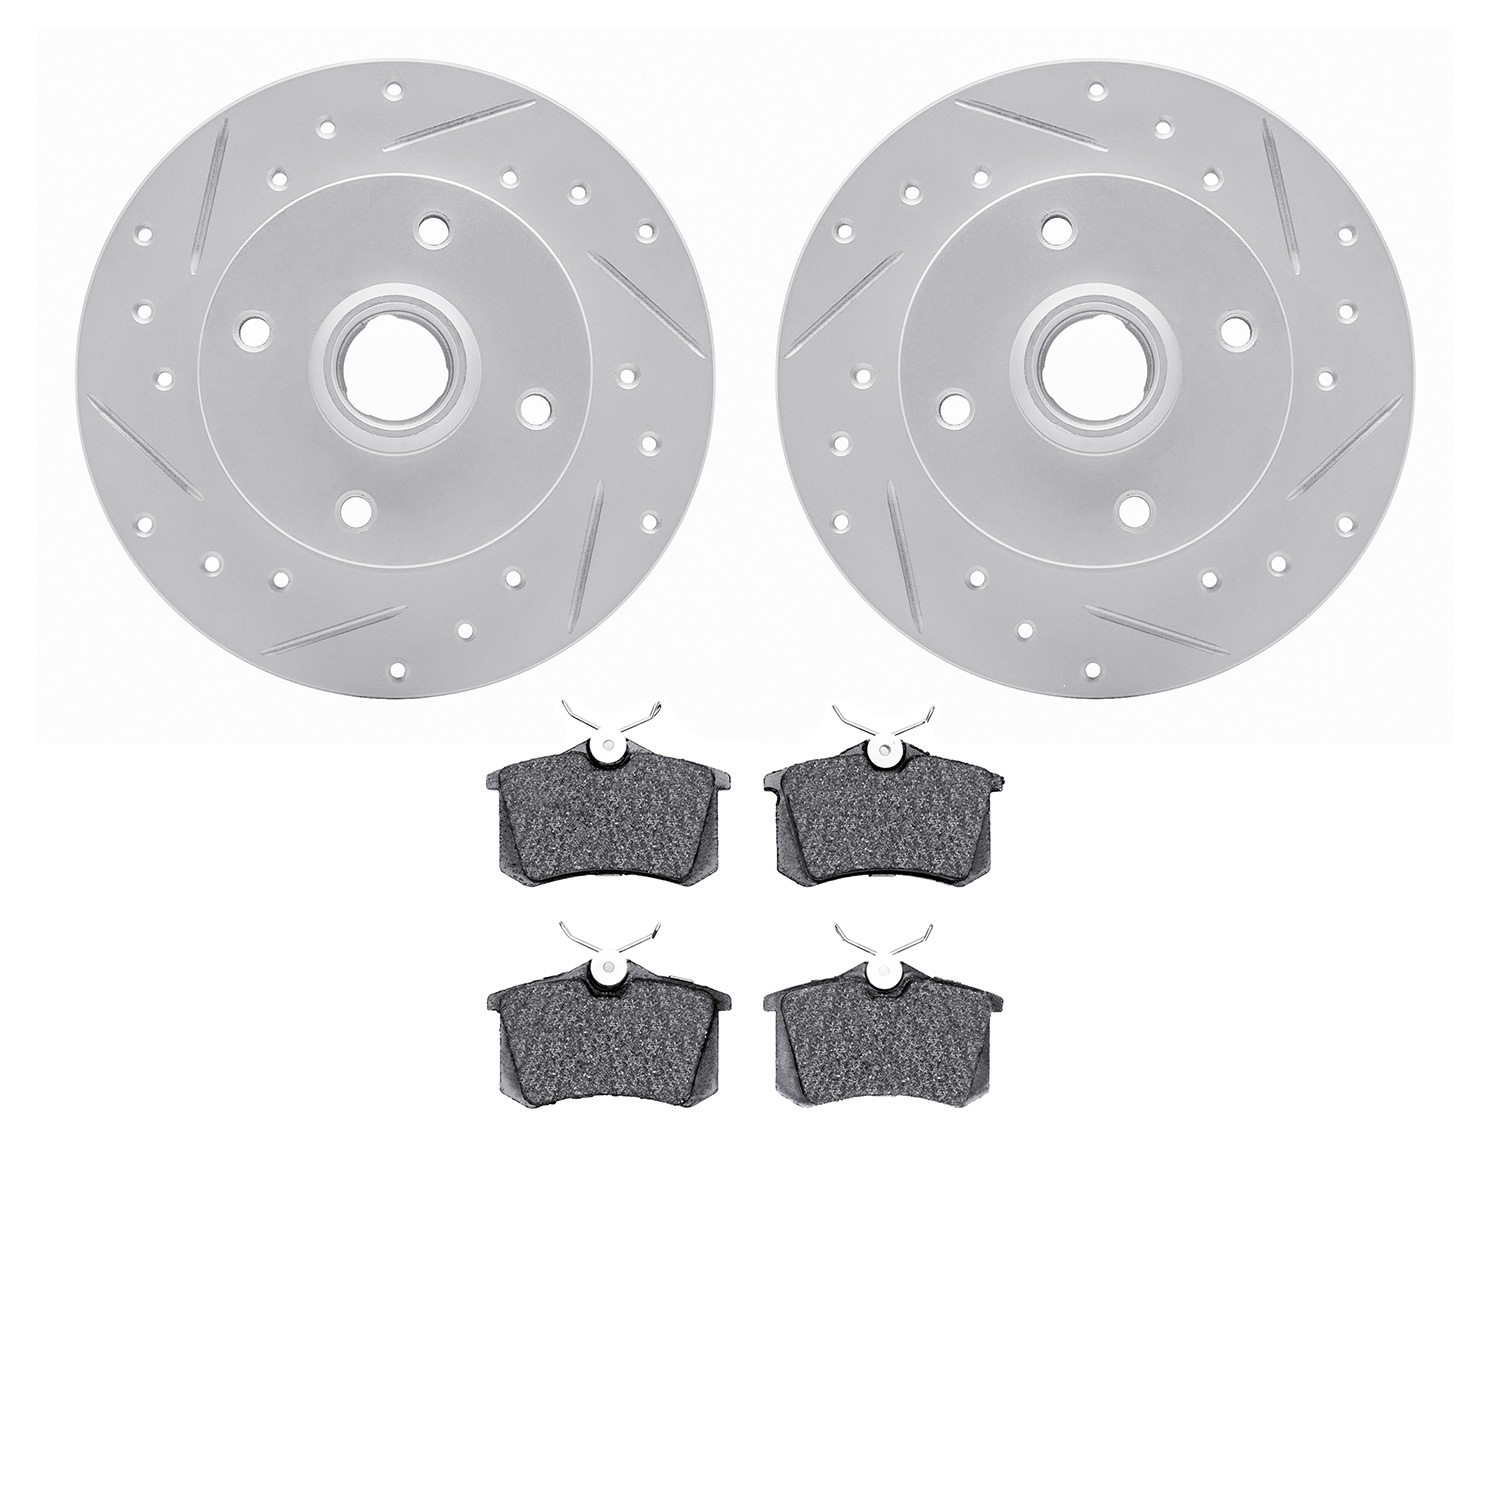 2502-74001 Geoperformance Drilled/Slotted Rotors w/5000 Advanced Brake Pads Kit, 1990-2002 Audi/Volkswagen, Position: Rear